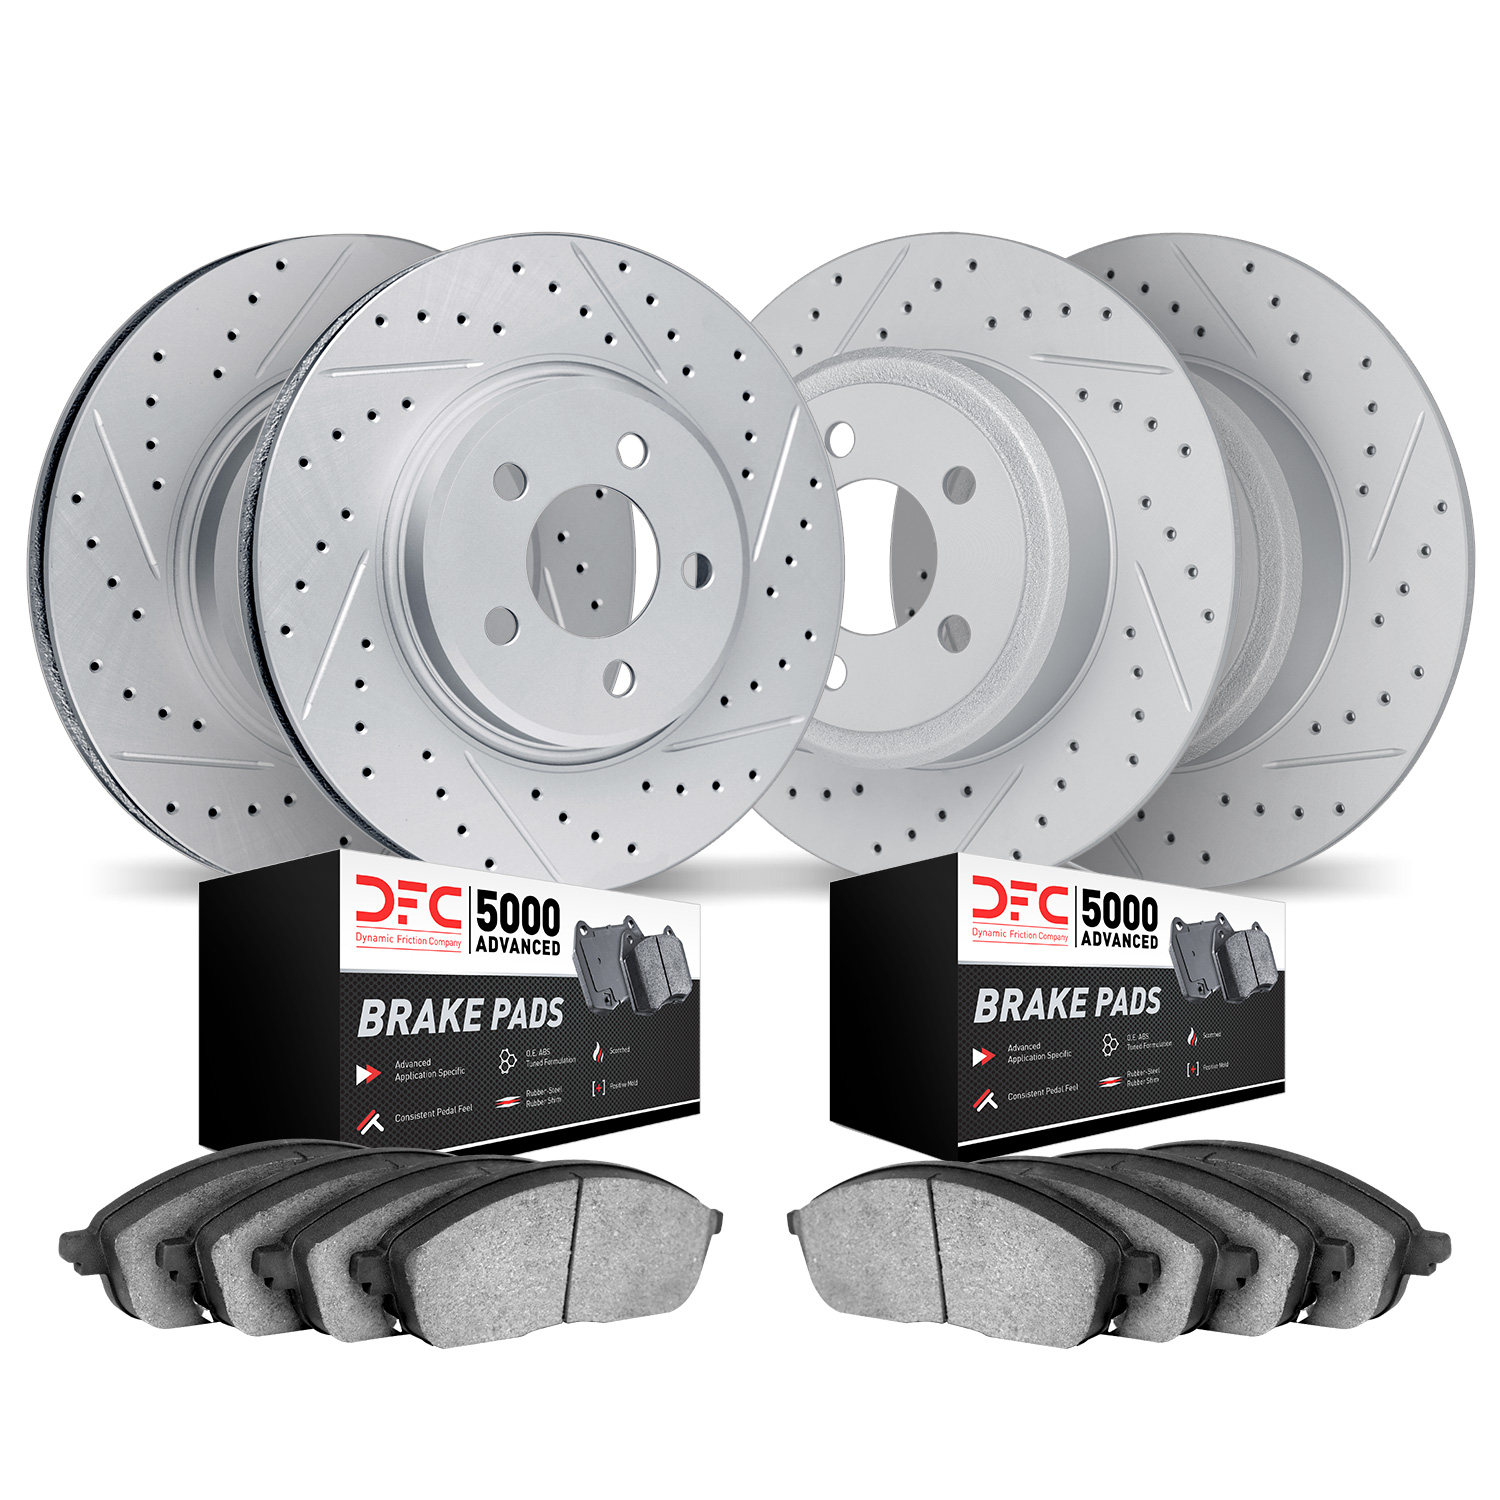 2504-54234 Geoperformance Drilled/Slotted Rotors w/5000 Advanced Brake Pads Kit, 1995-2001 Ford/Lincoln/Mercury/Mazda, Position: